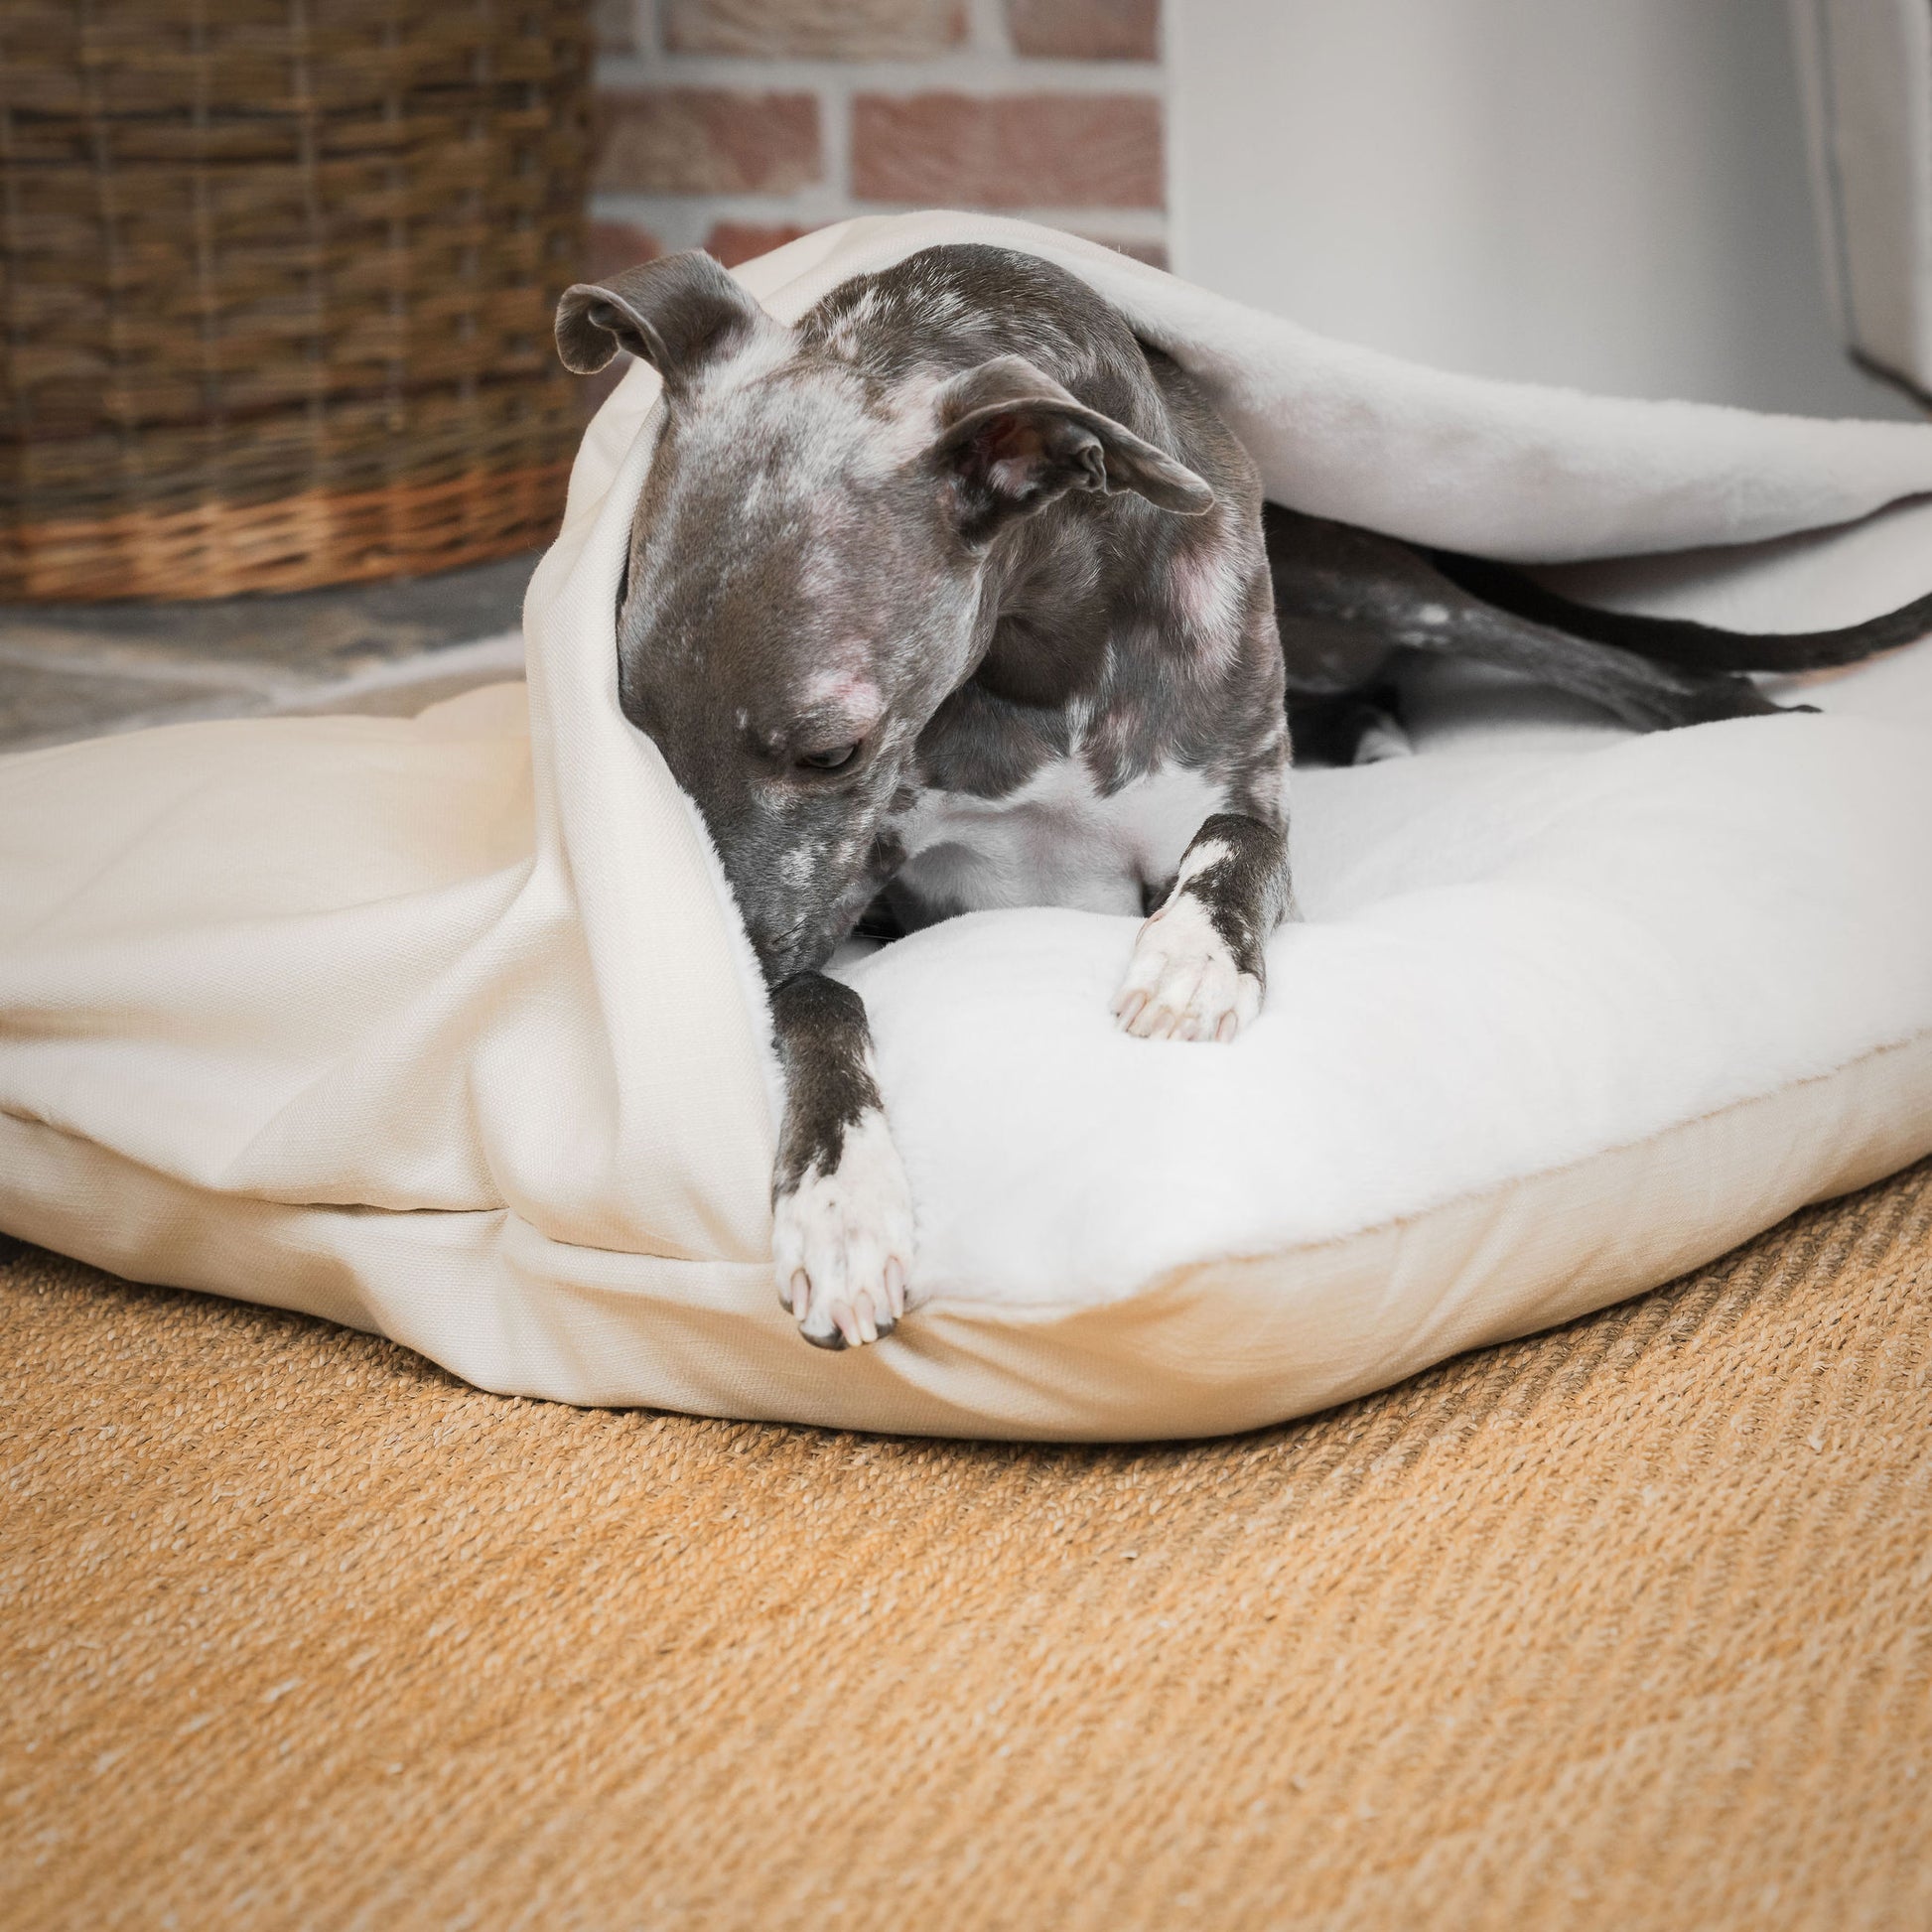 Discover The Perfect Burrow For Your Pet, Our Stunning Sleepy Burrow Dog Beds In Savanna Bone Is The Perfect Bed Choice For Your Pet, Available Now at Lords & Labradors US